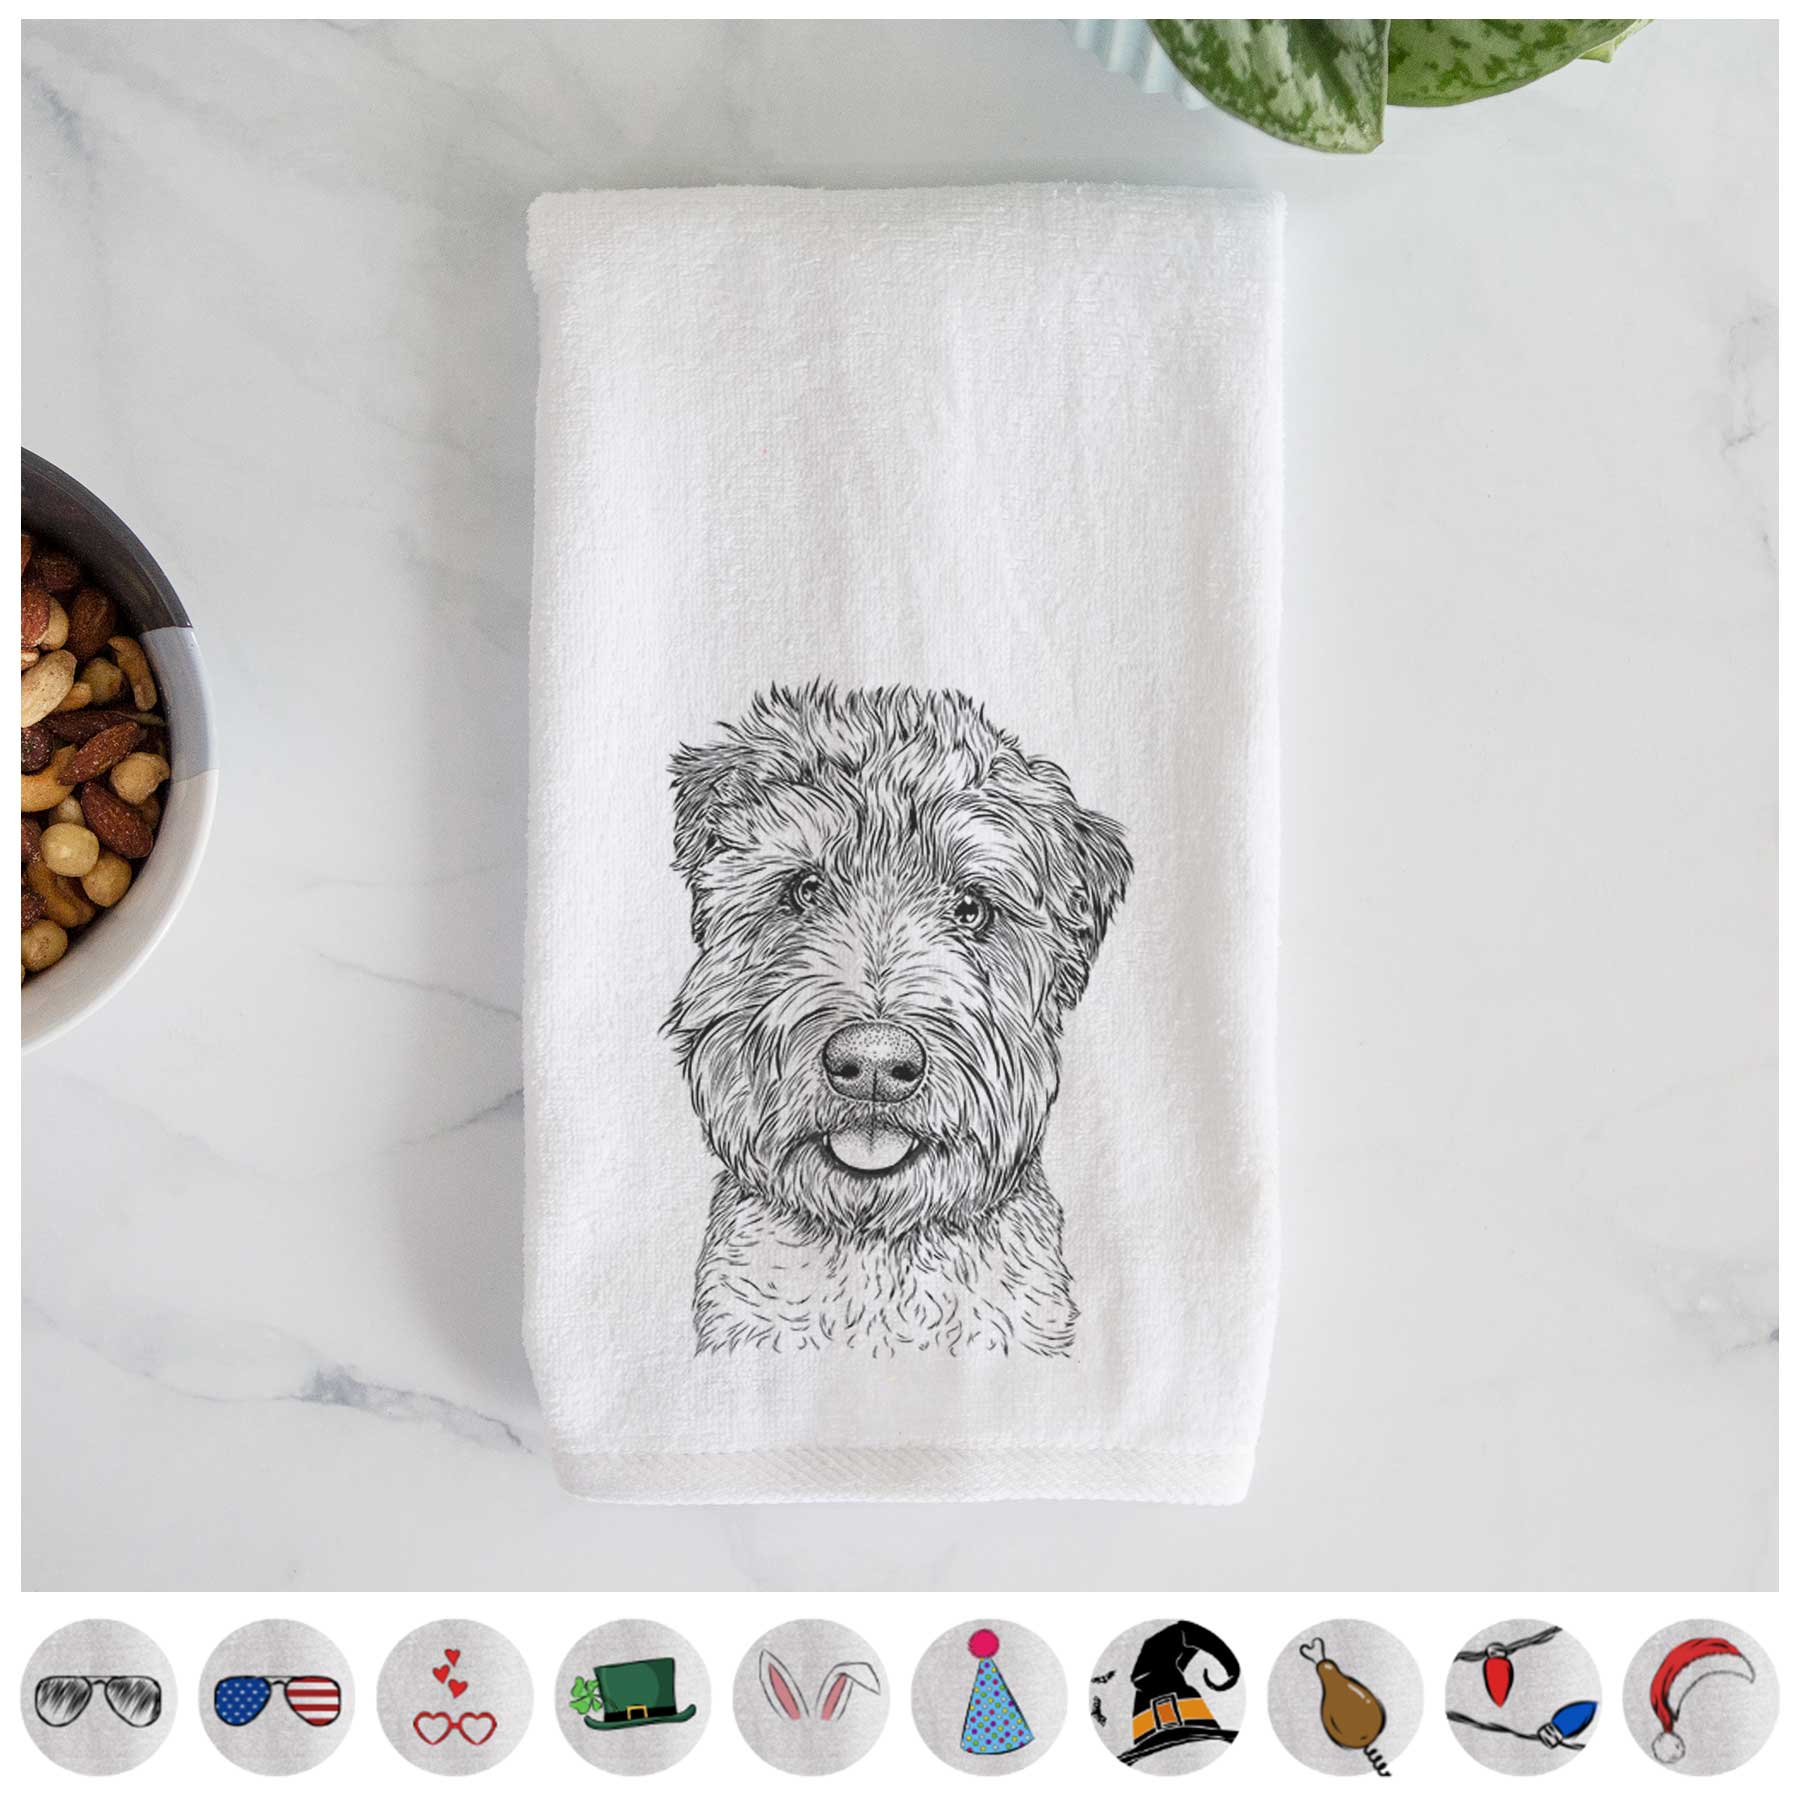 Milton the Soft Coated Wheaten Terrier Hand Towel